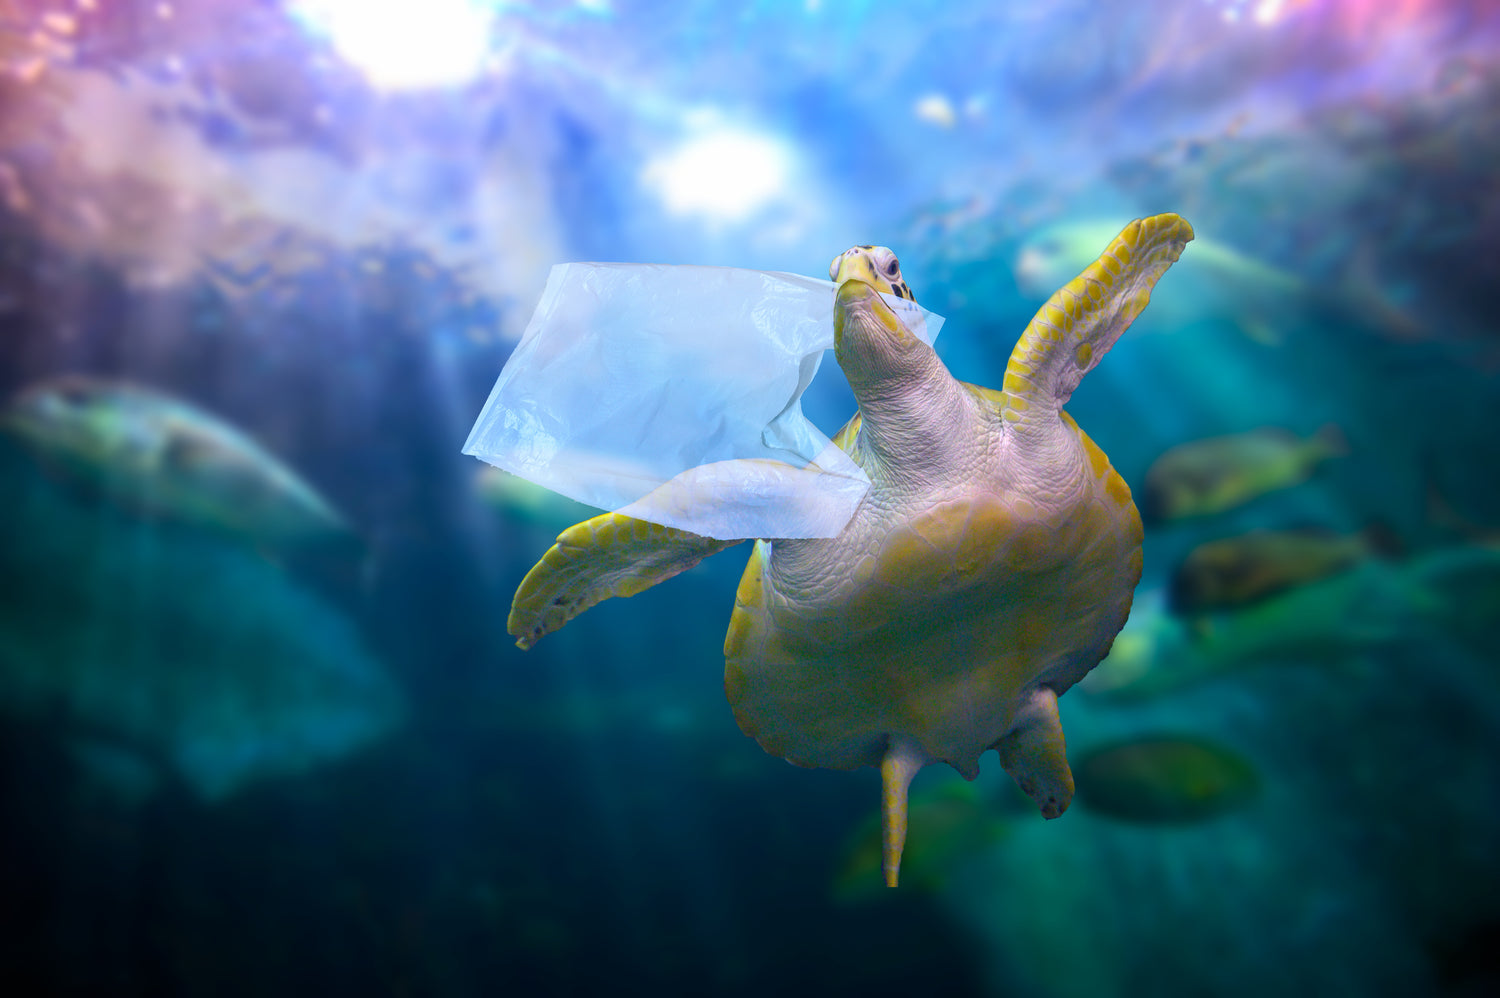 sea turtle under water with plastic bag in its mouth